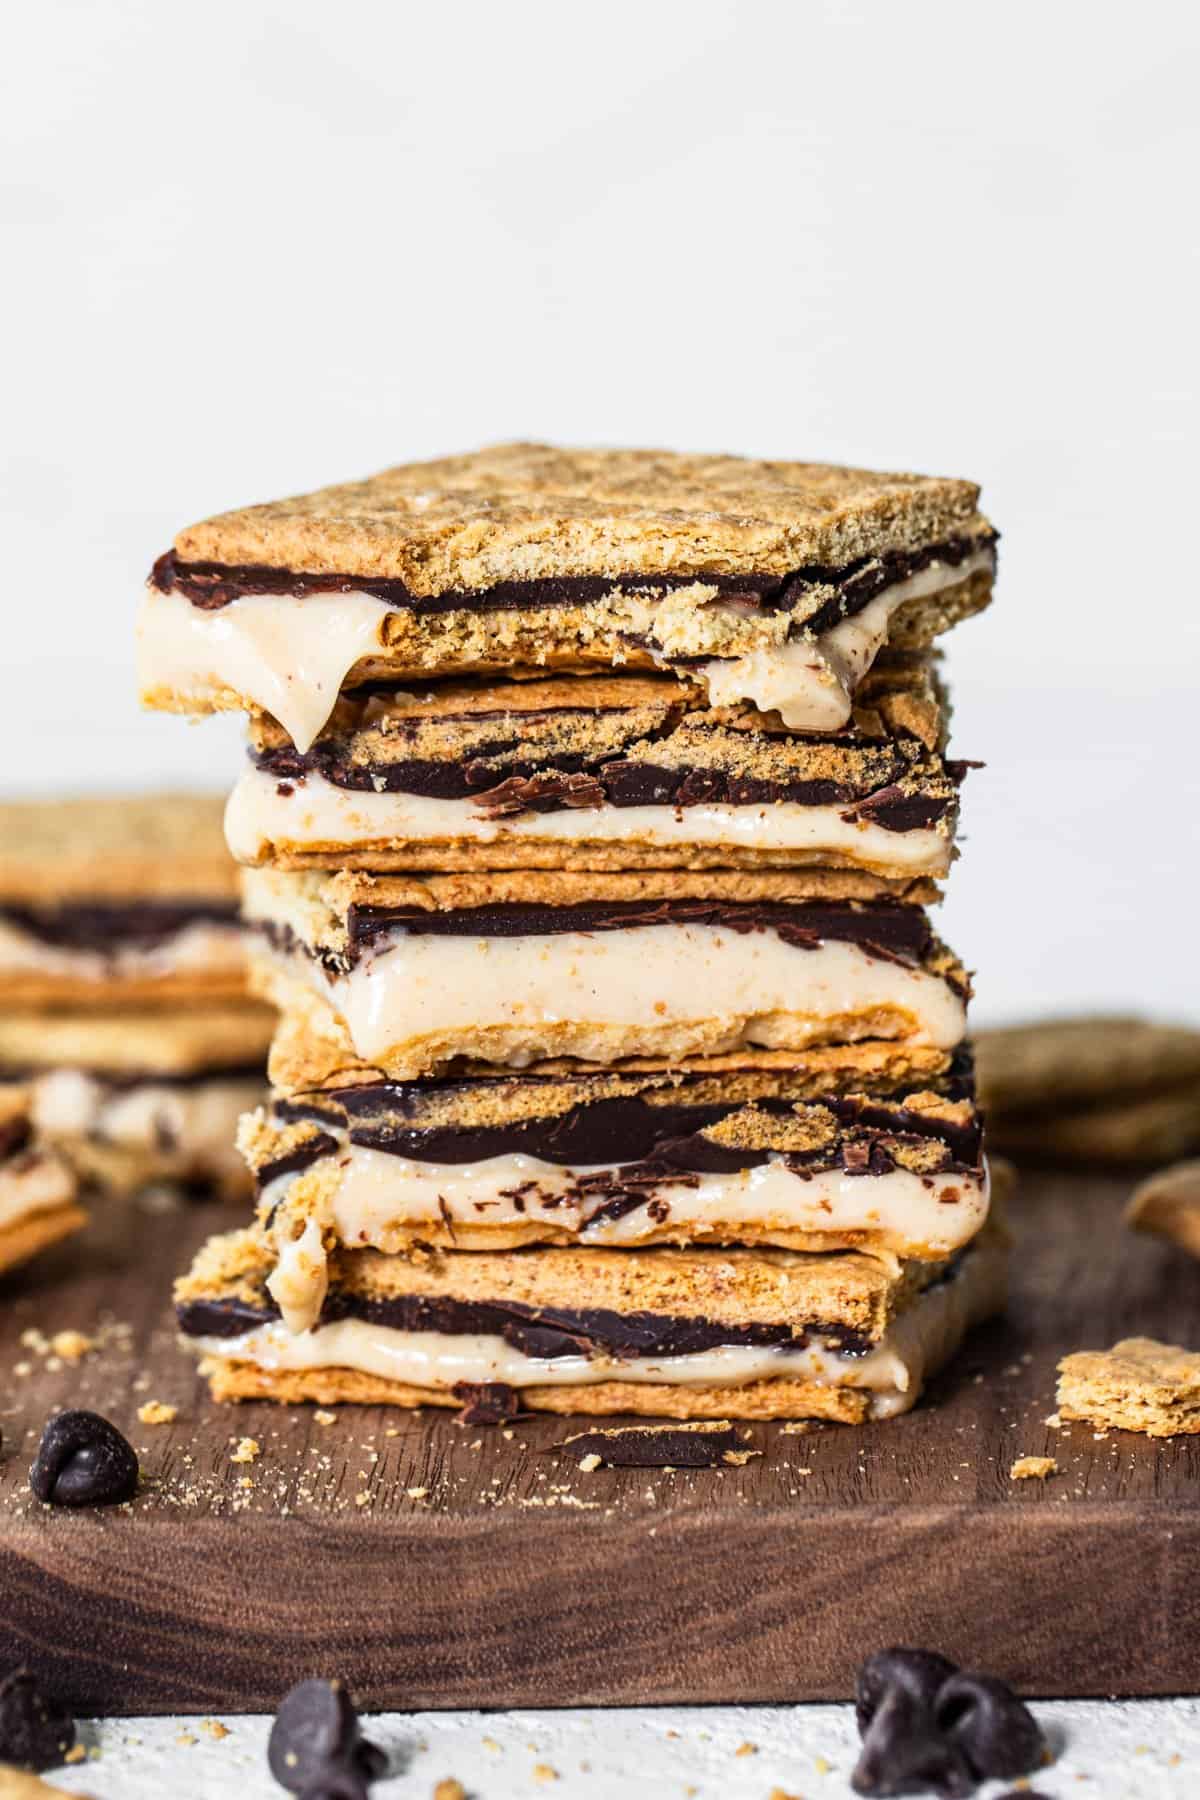 A stack of s'mores with melted chocolate and marshmallows, surrounded by cookie crumbs and chocolate chips.